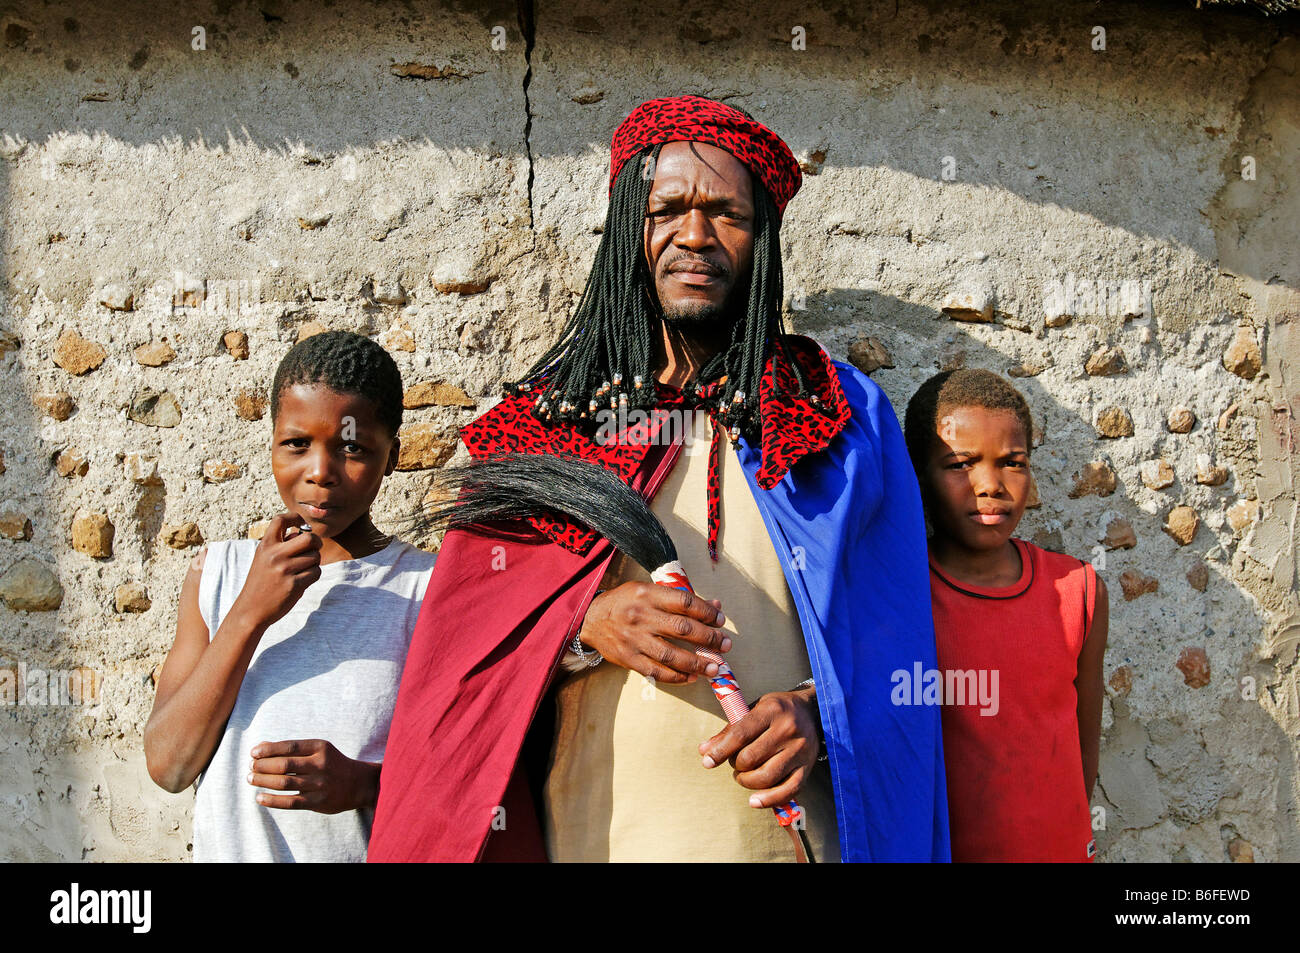 Sangoma or Shaman or traditional healer of the Zulu people, with his two sons, Kwazulu-Natal, South Africa Stock Photo